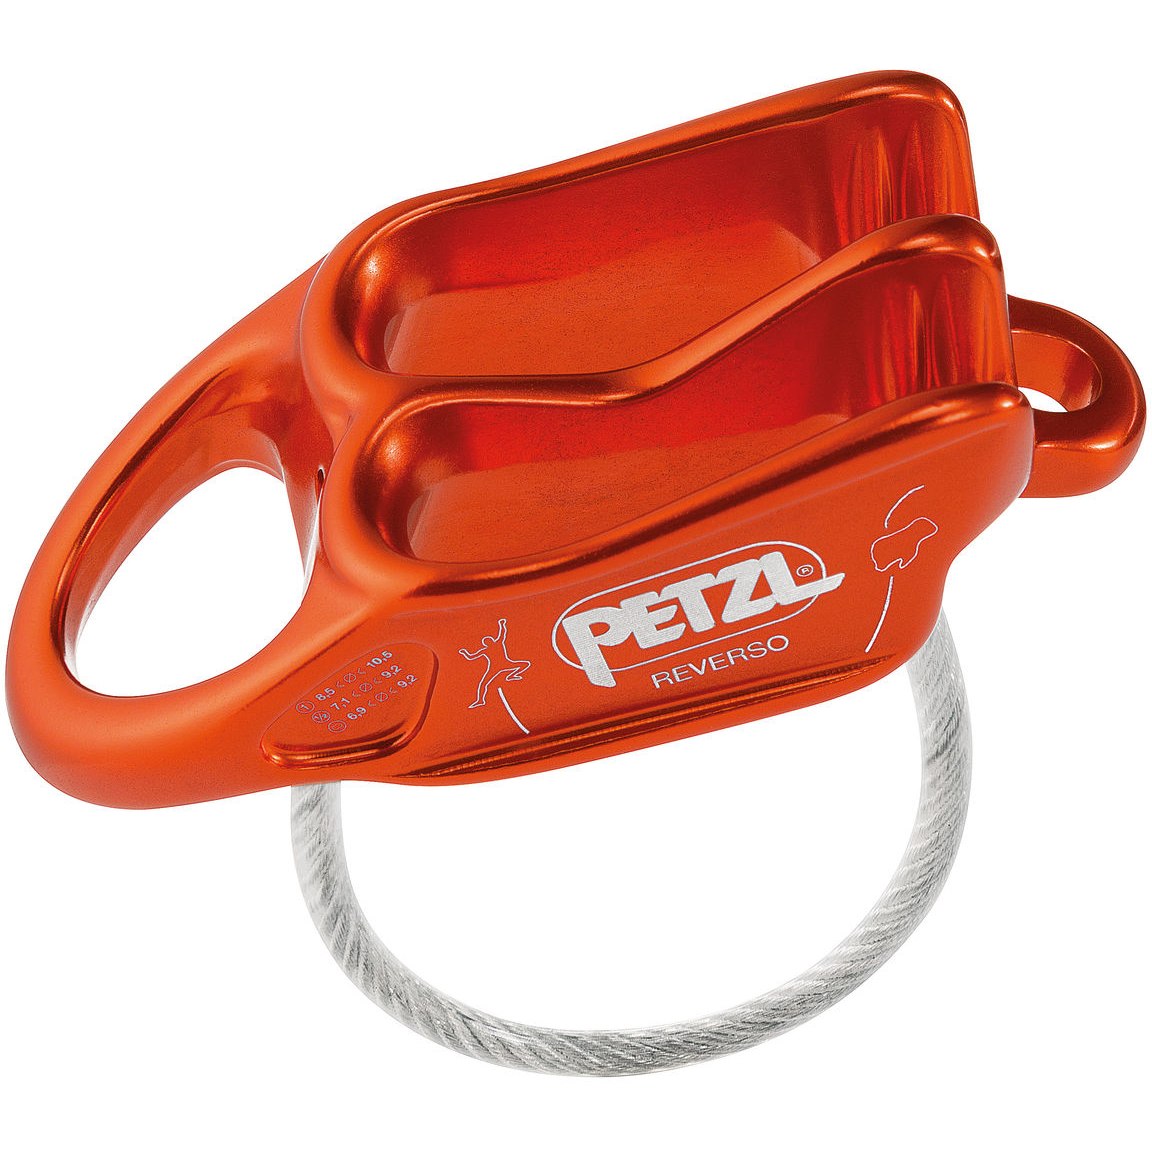 Picture of Petzl Reverso Belay/Rappel Device - red